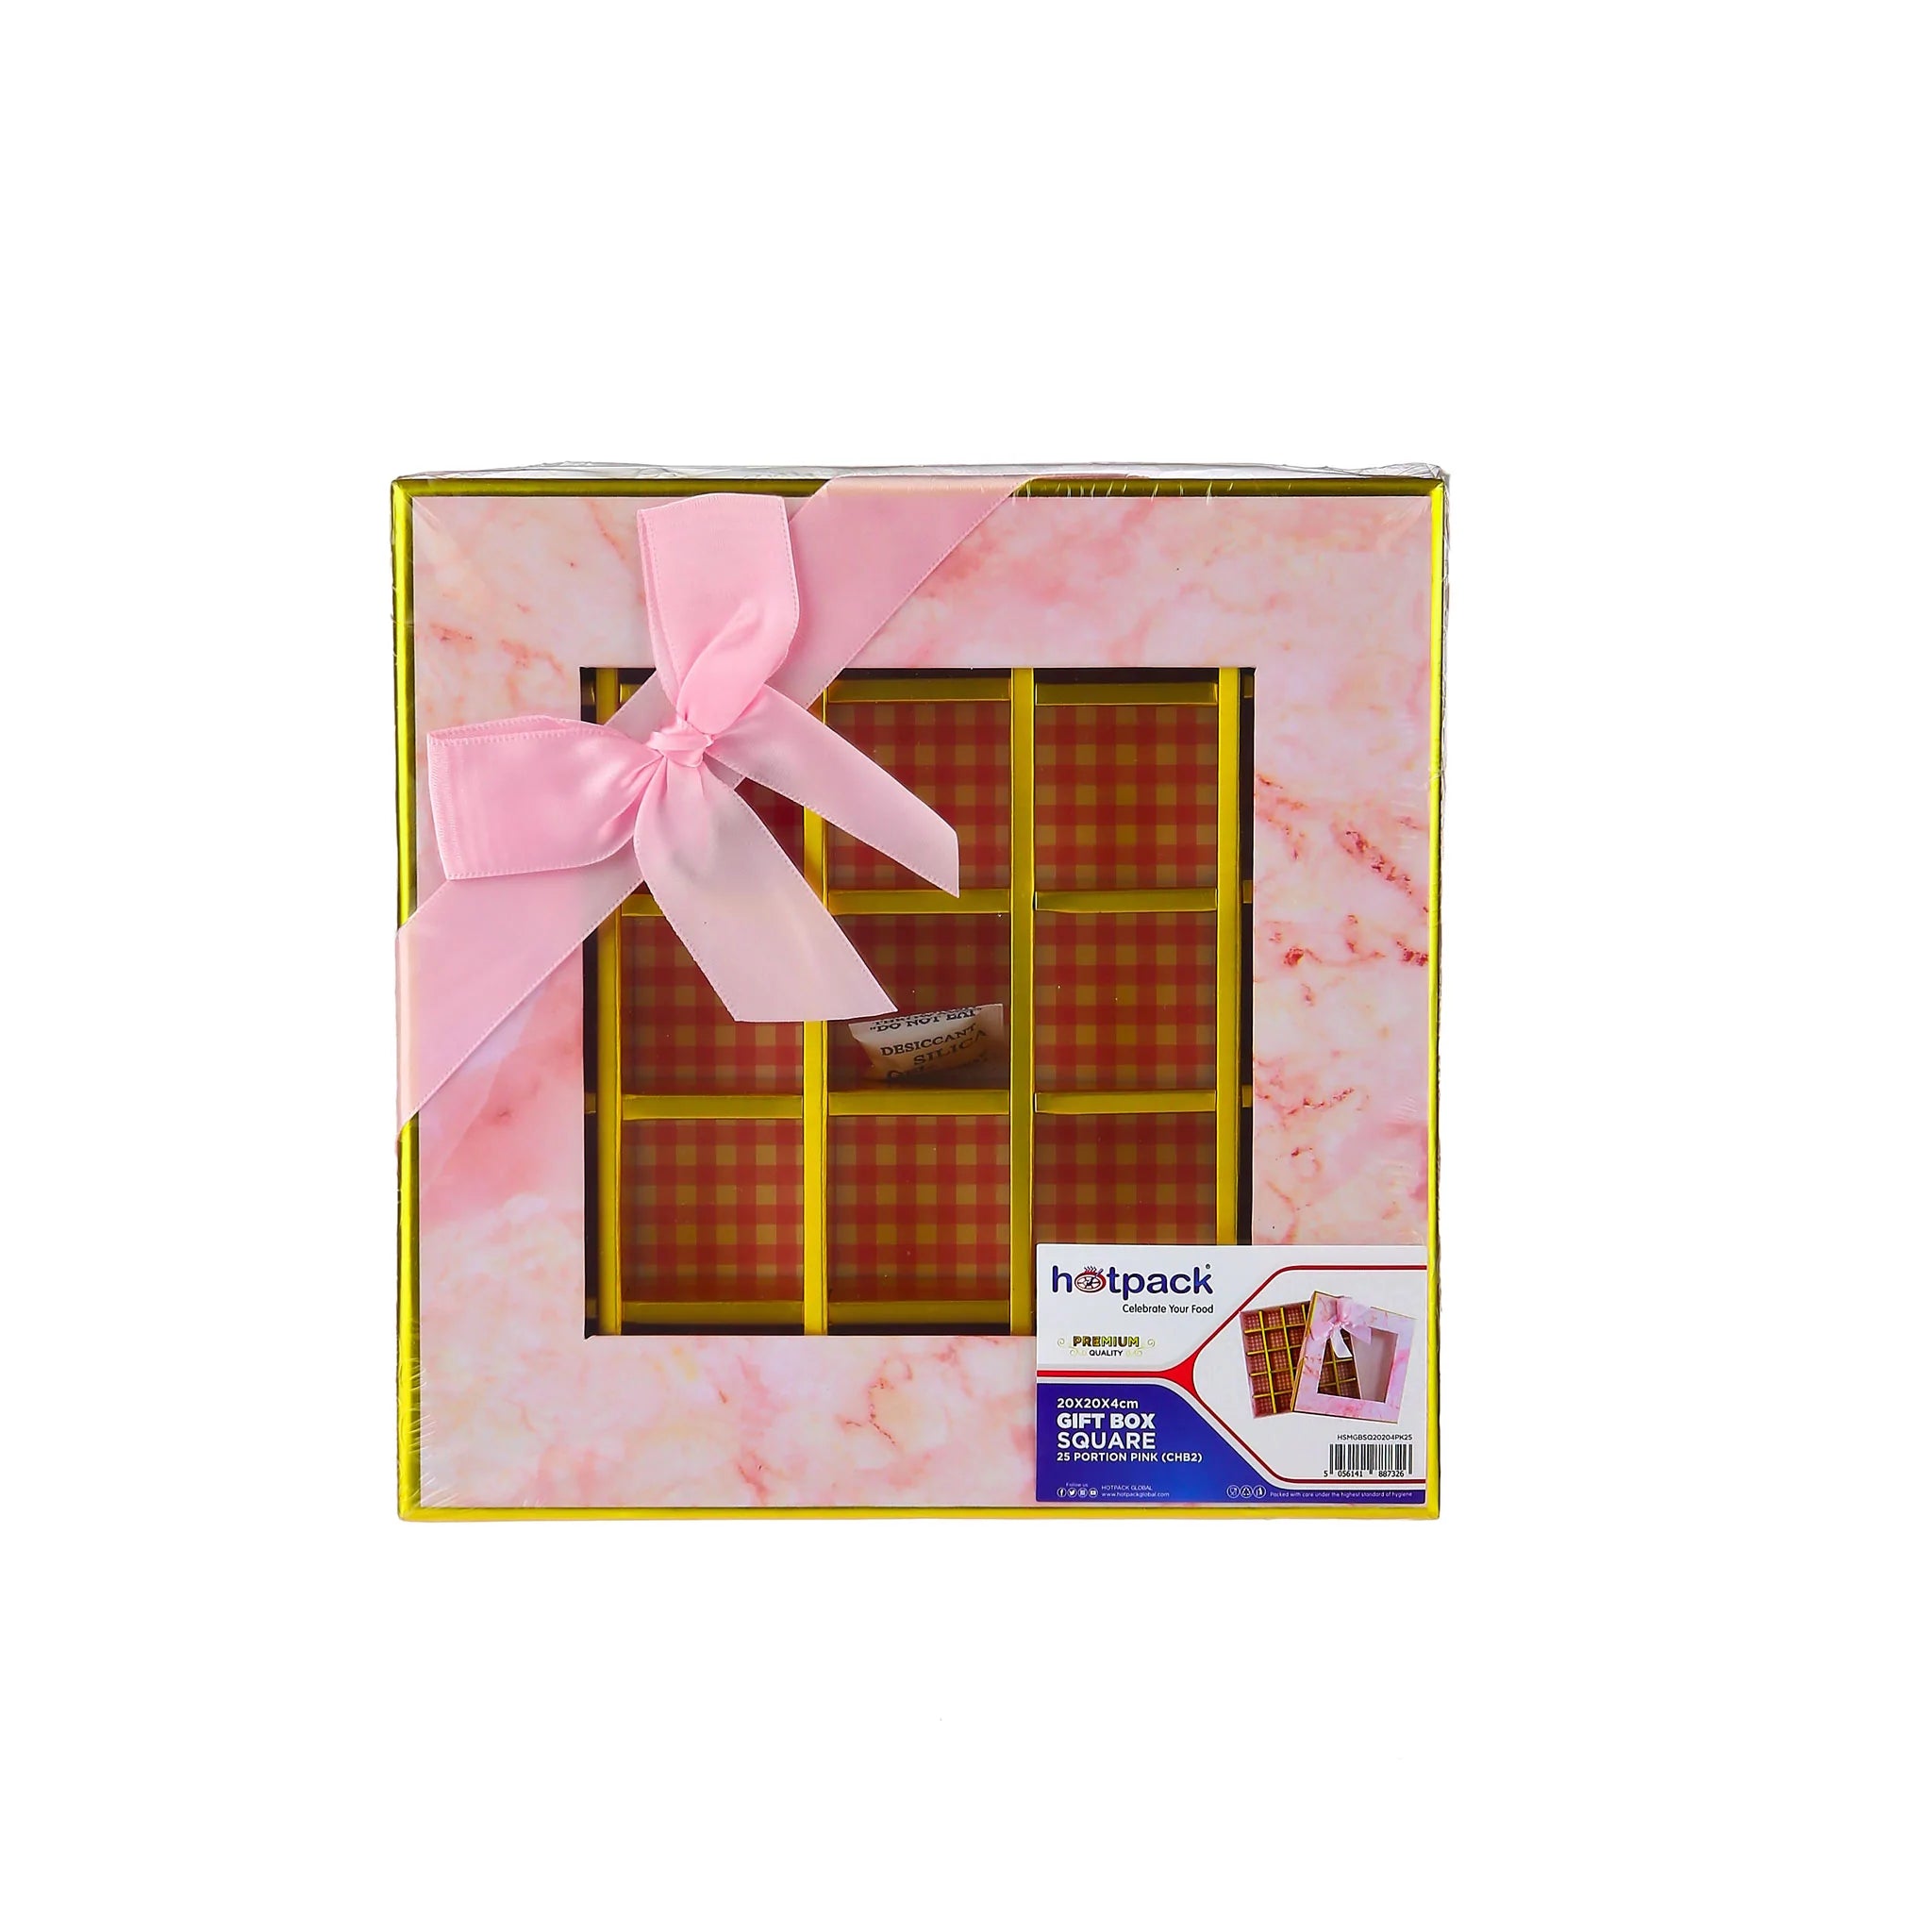 48 Pieces Square Pink Chocolate Gift Box Shape 16 Division -17*17*4 cm